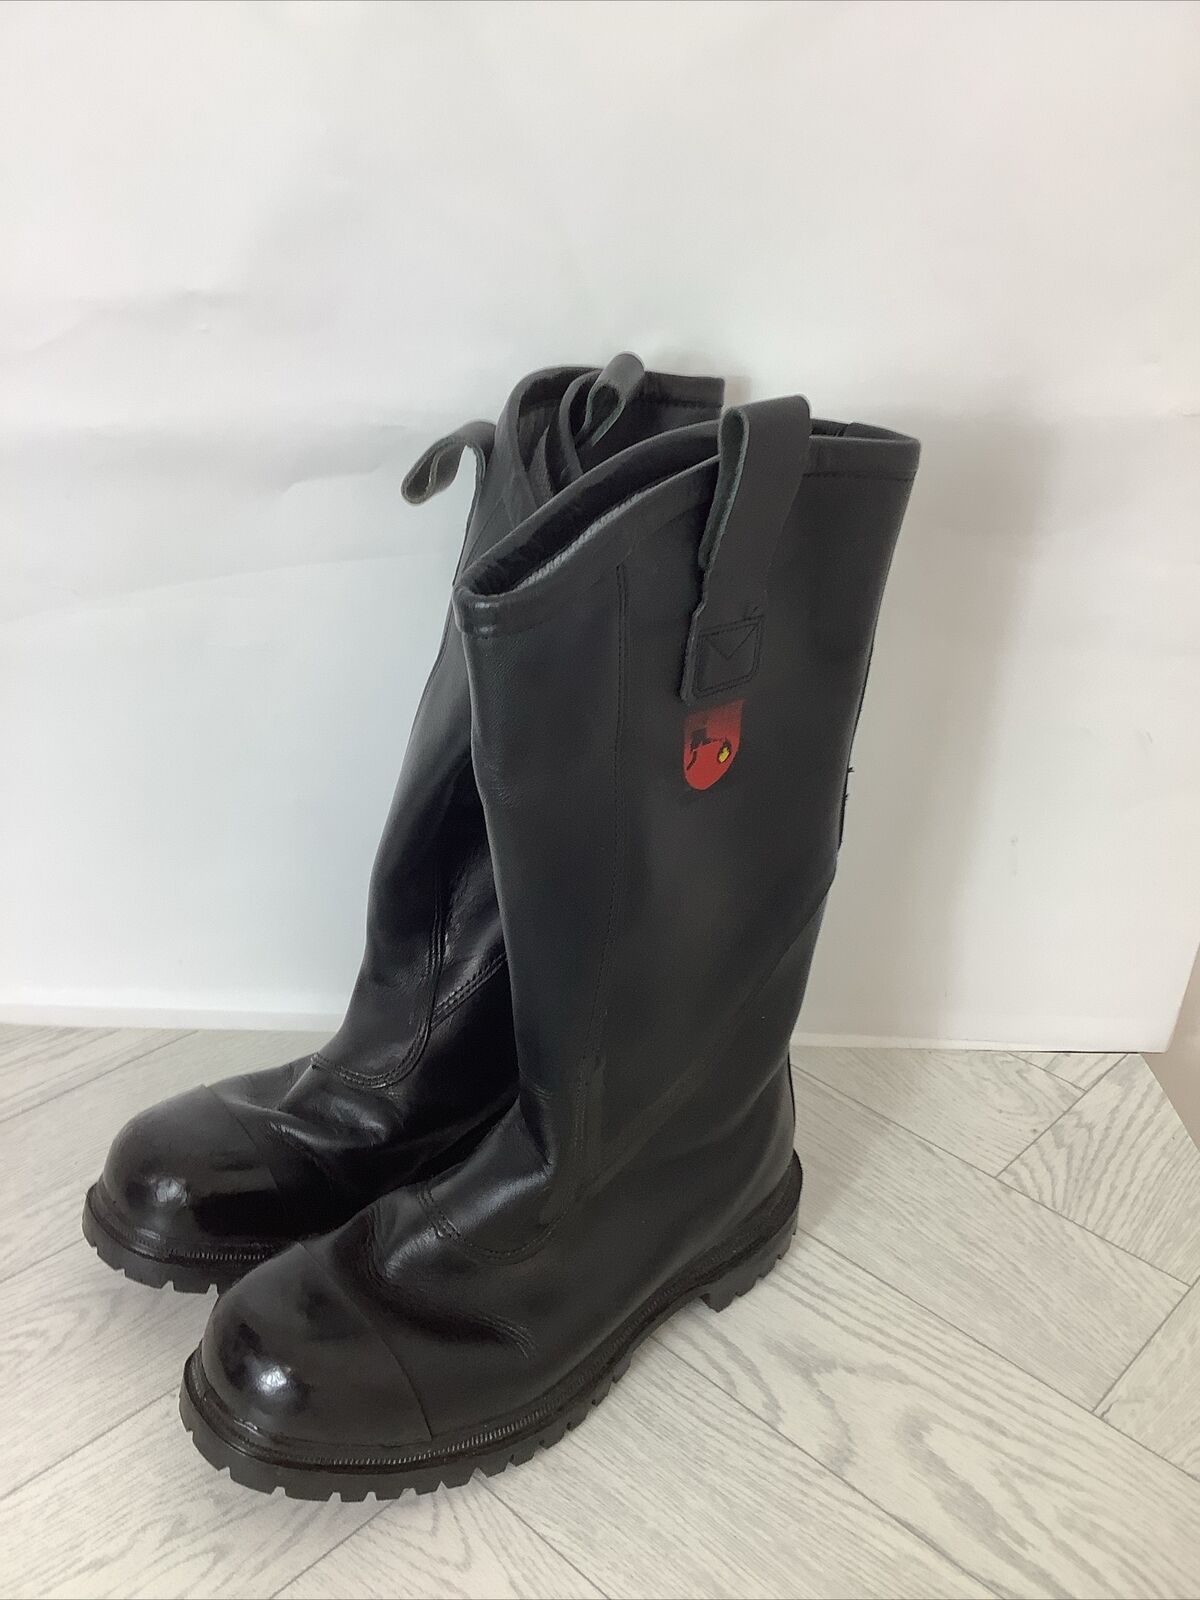 Samson British Firefighter Boots UK7 Black Leather 1996 issue # A